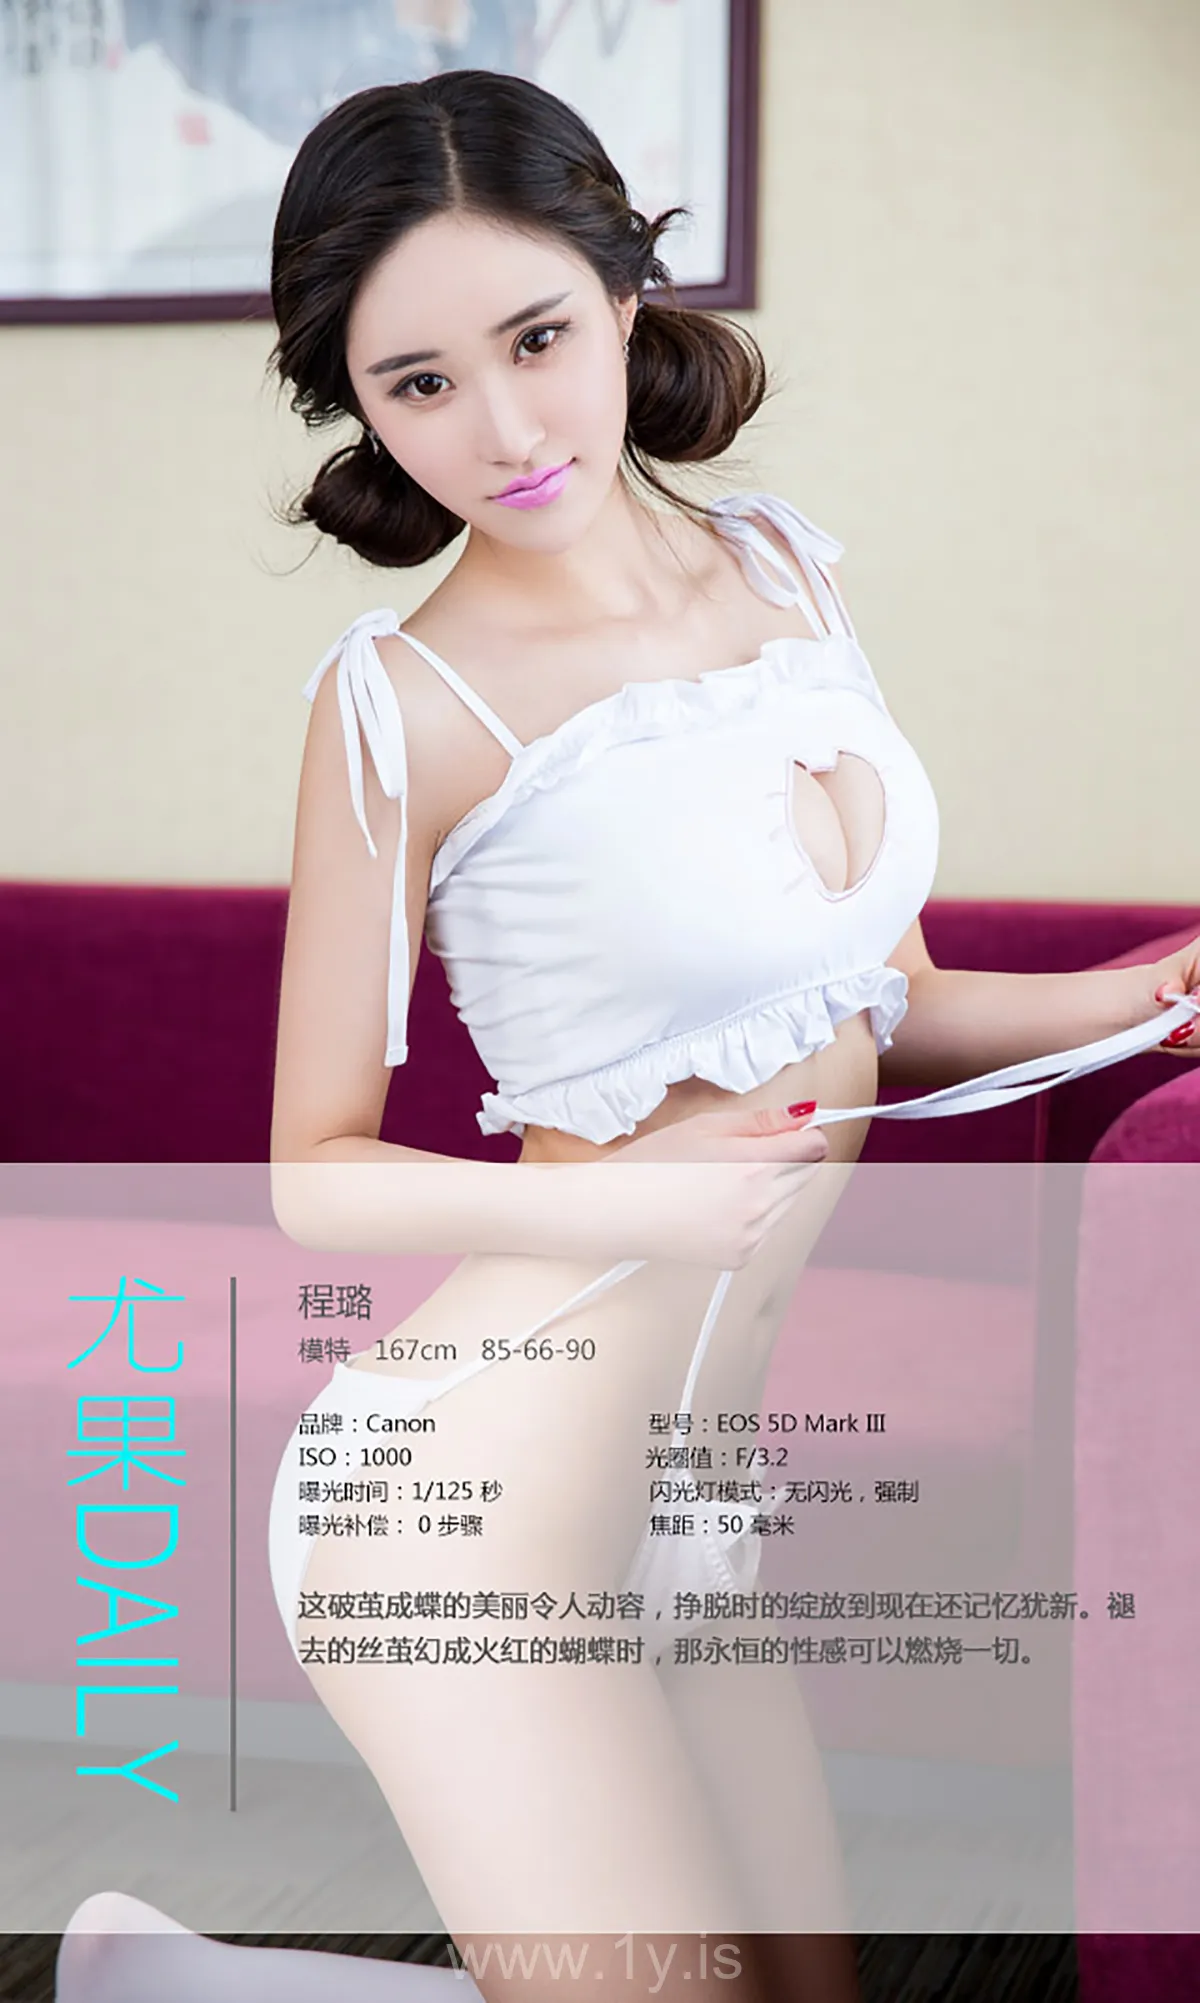 UGIRLS NO.361 Sexy & Knockout Chinese Belle 程璐蝴蝶诱惑